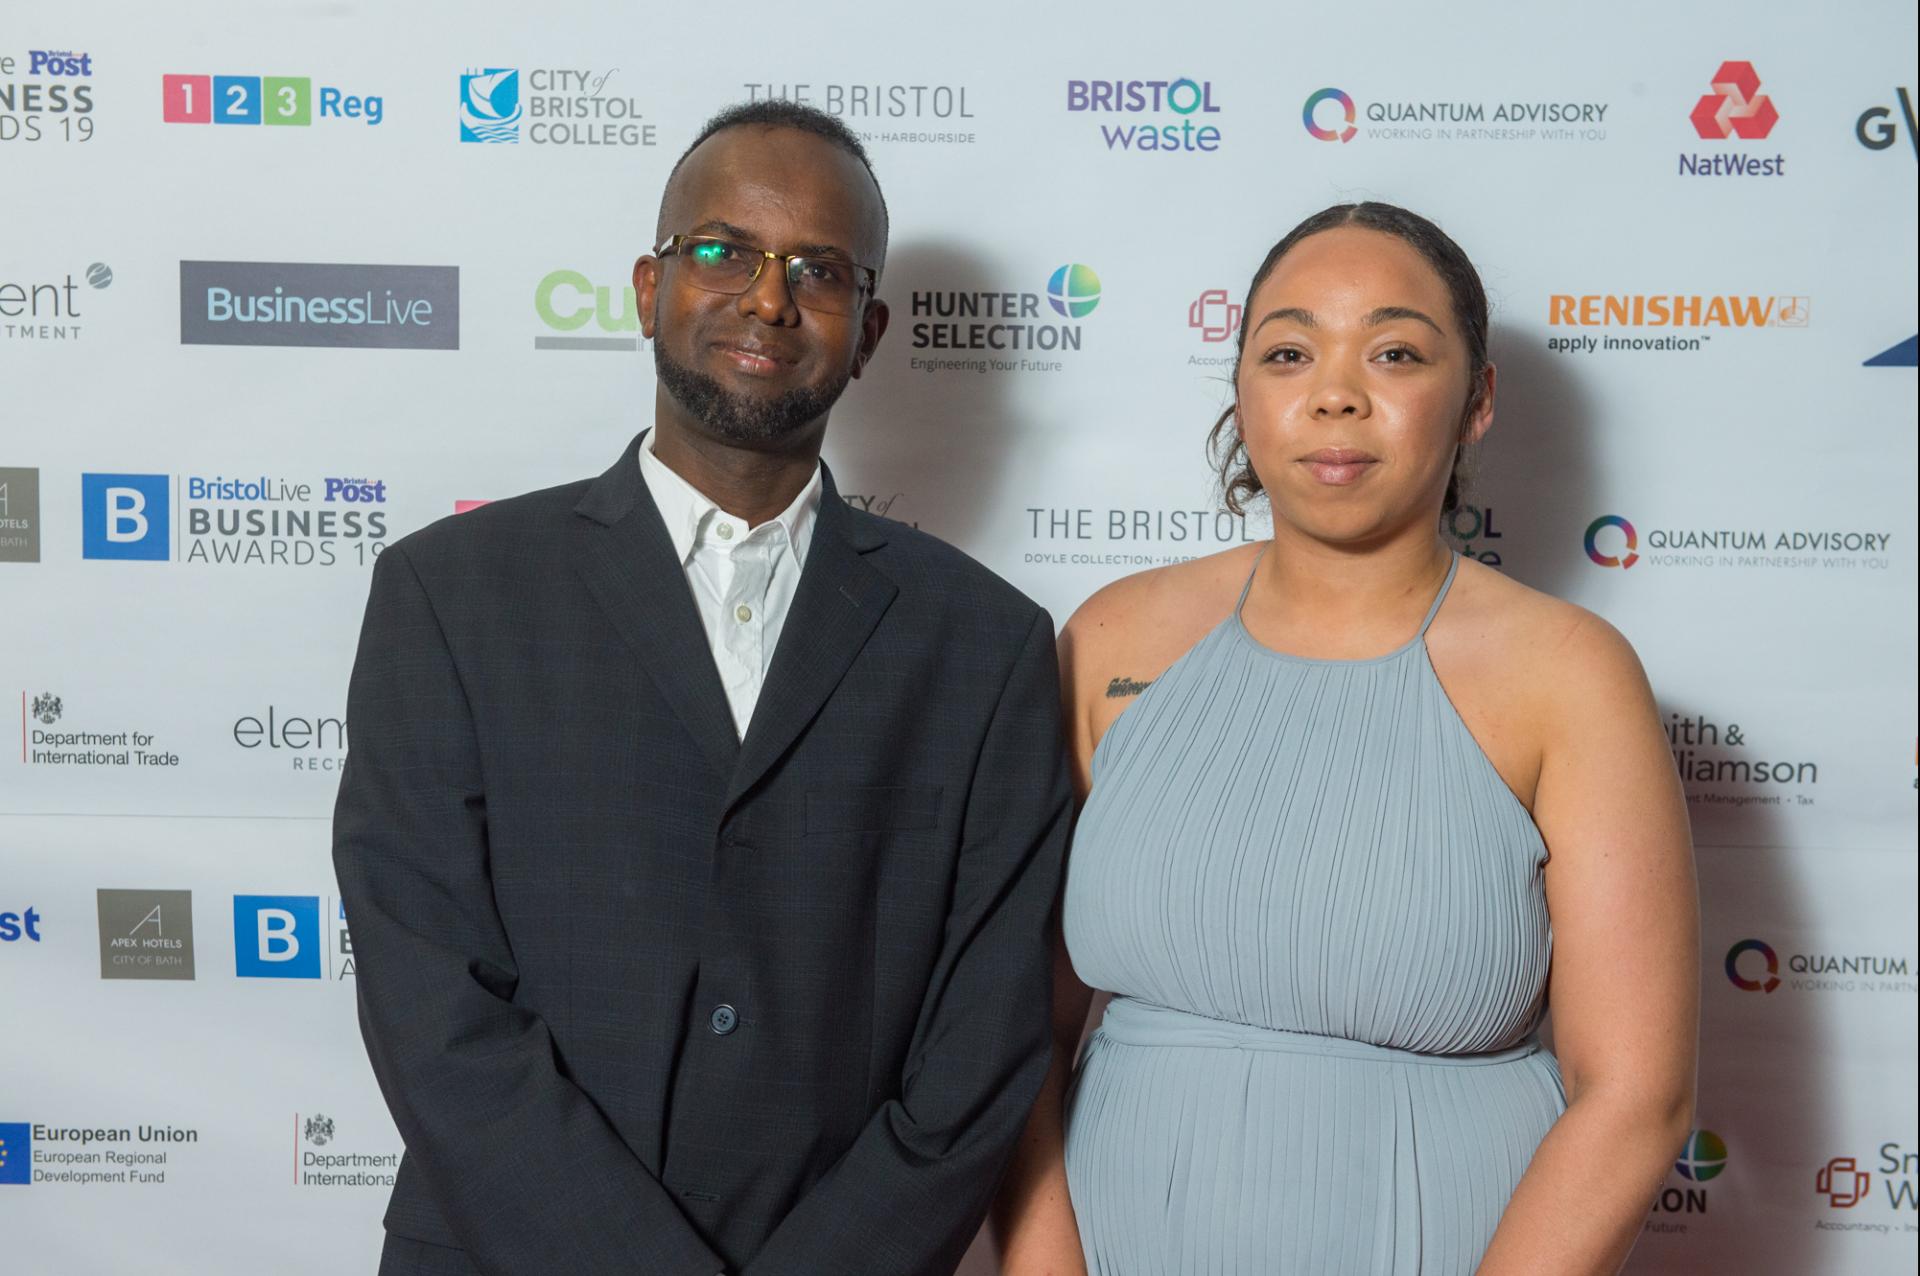 Holly Fowden and Saed Mohamed at the Bristol Live Bristol Post Business Awards 2019